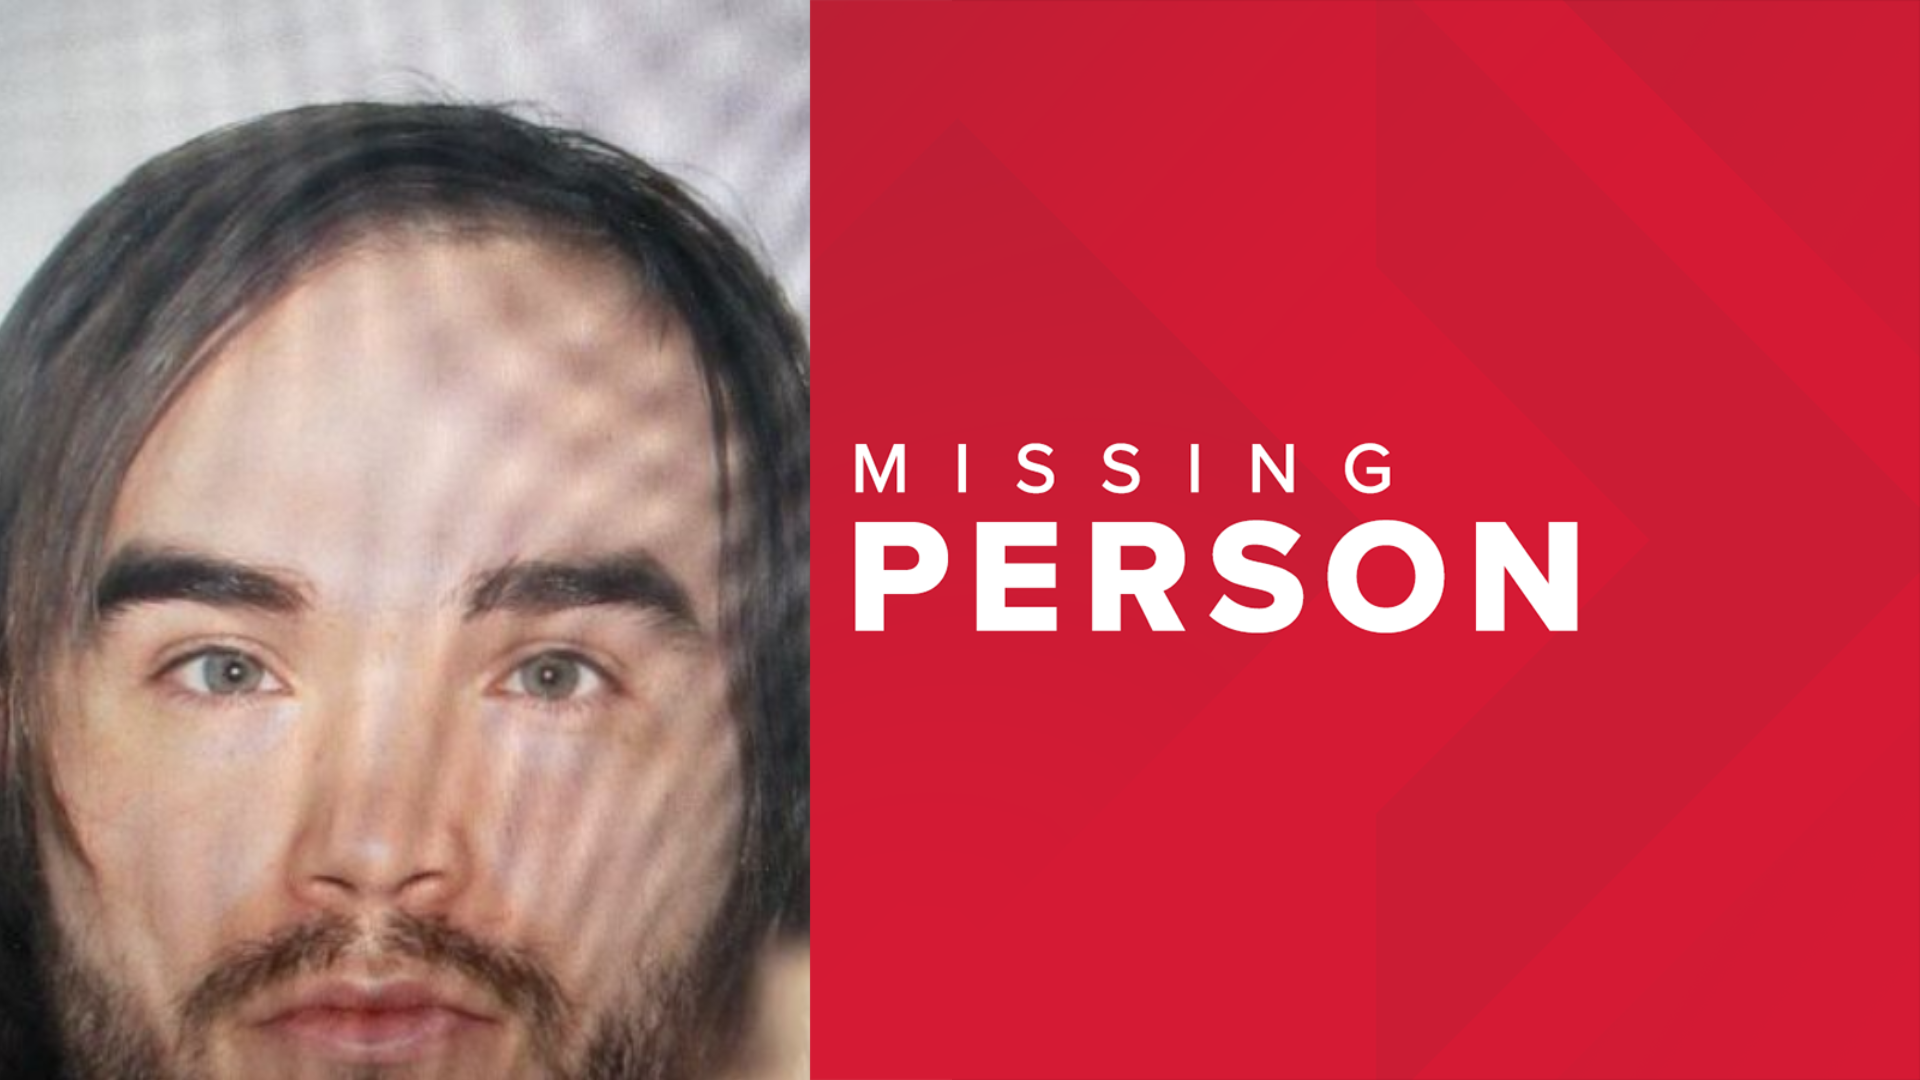 James City County Police said 30-year-old Corey Ray Wheaton was last seen on Feb. 19 in the 4900 block of Westmoreland Drive and suffers from a medical condition.